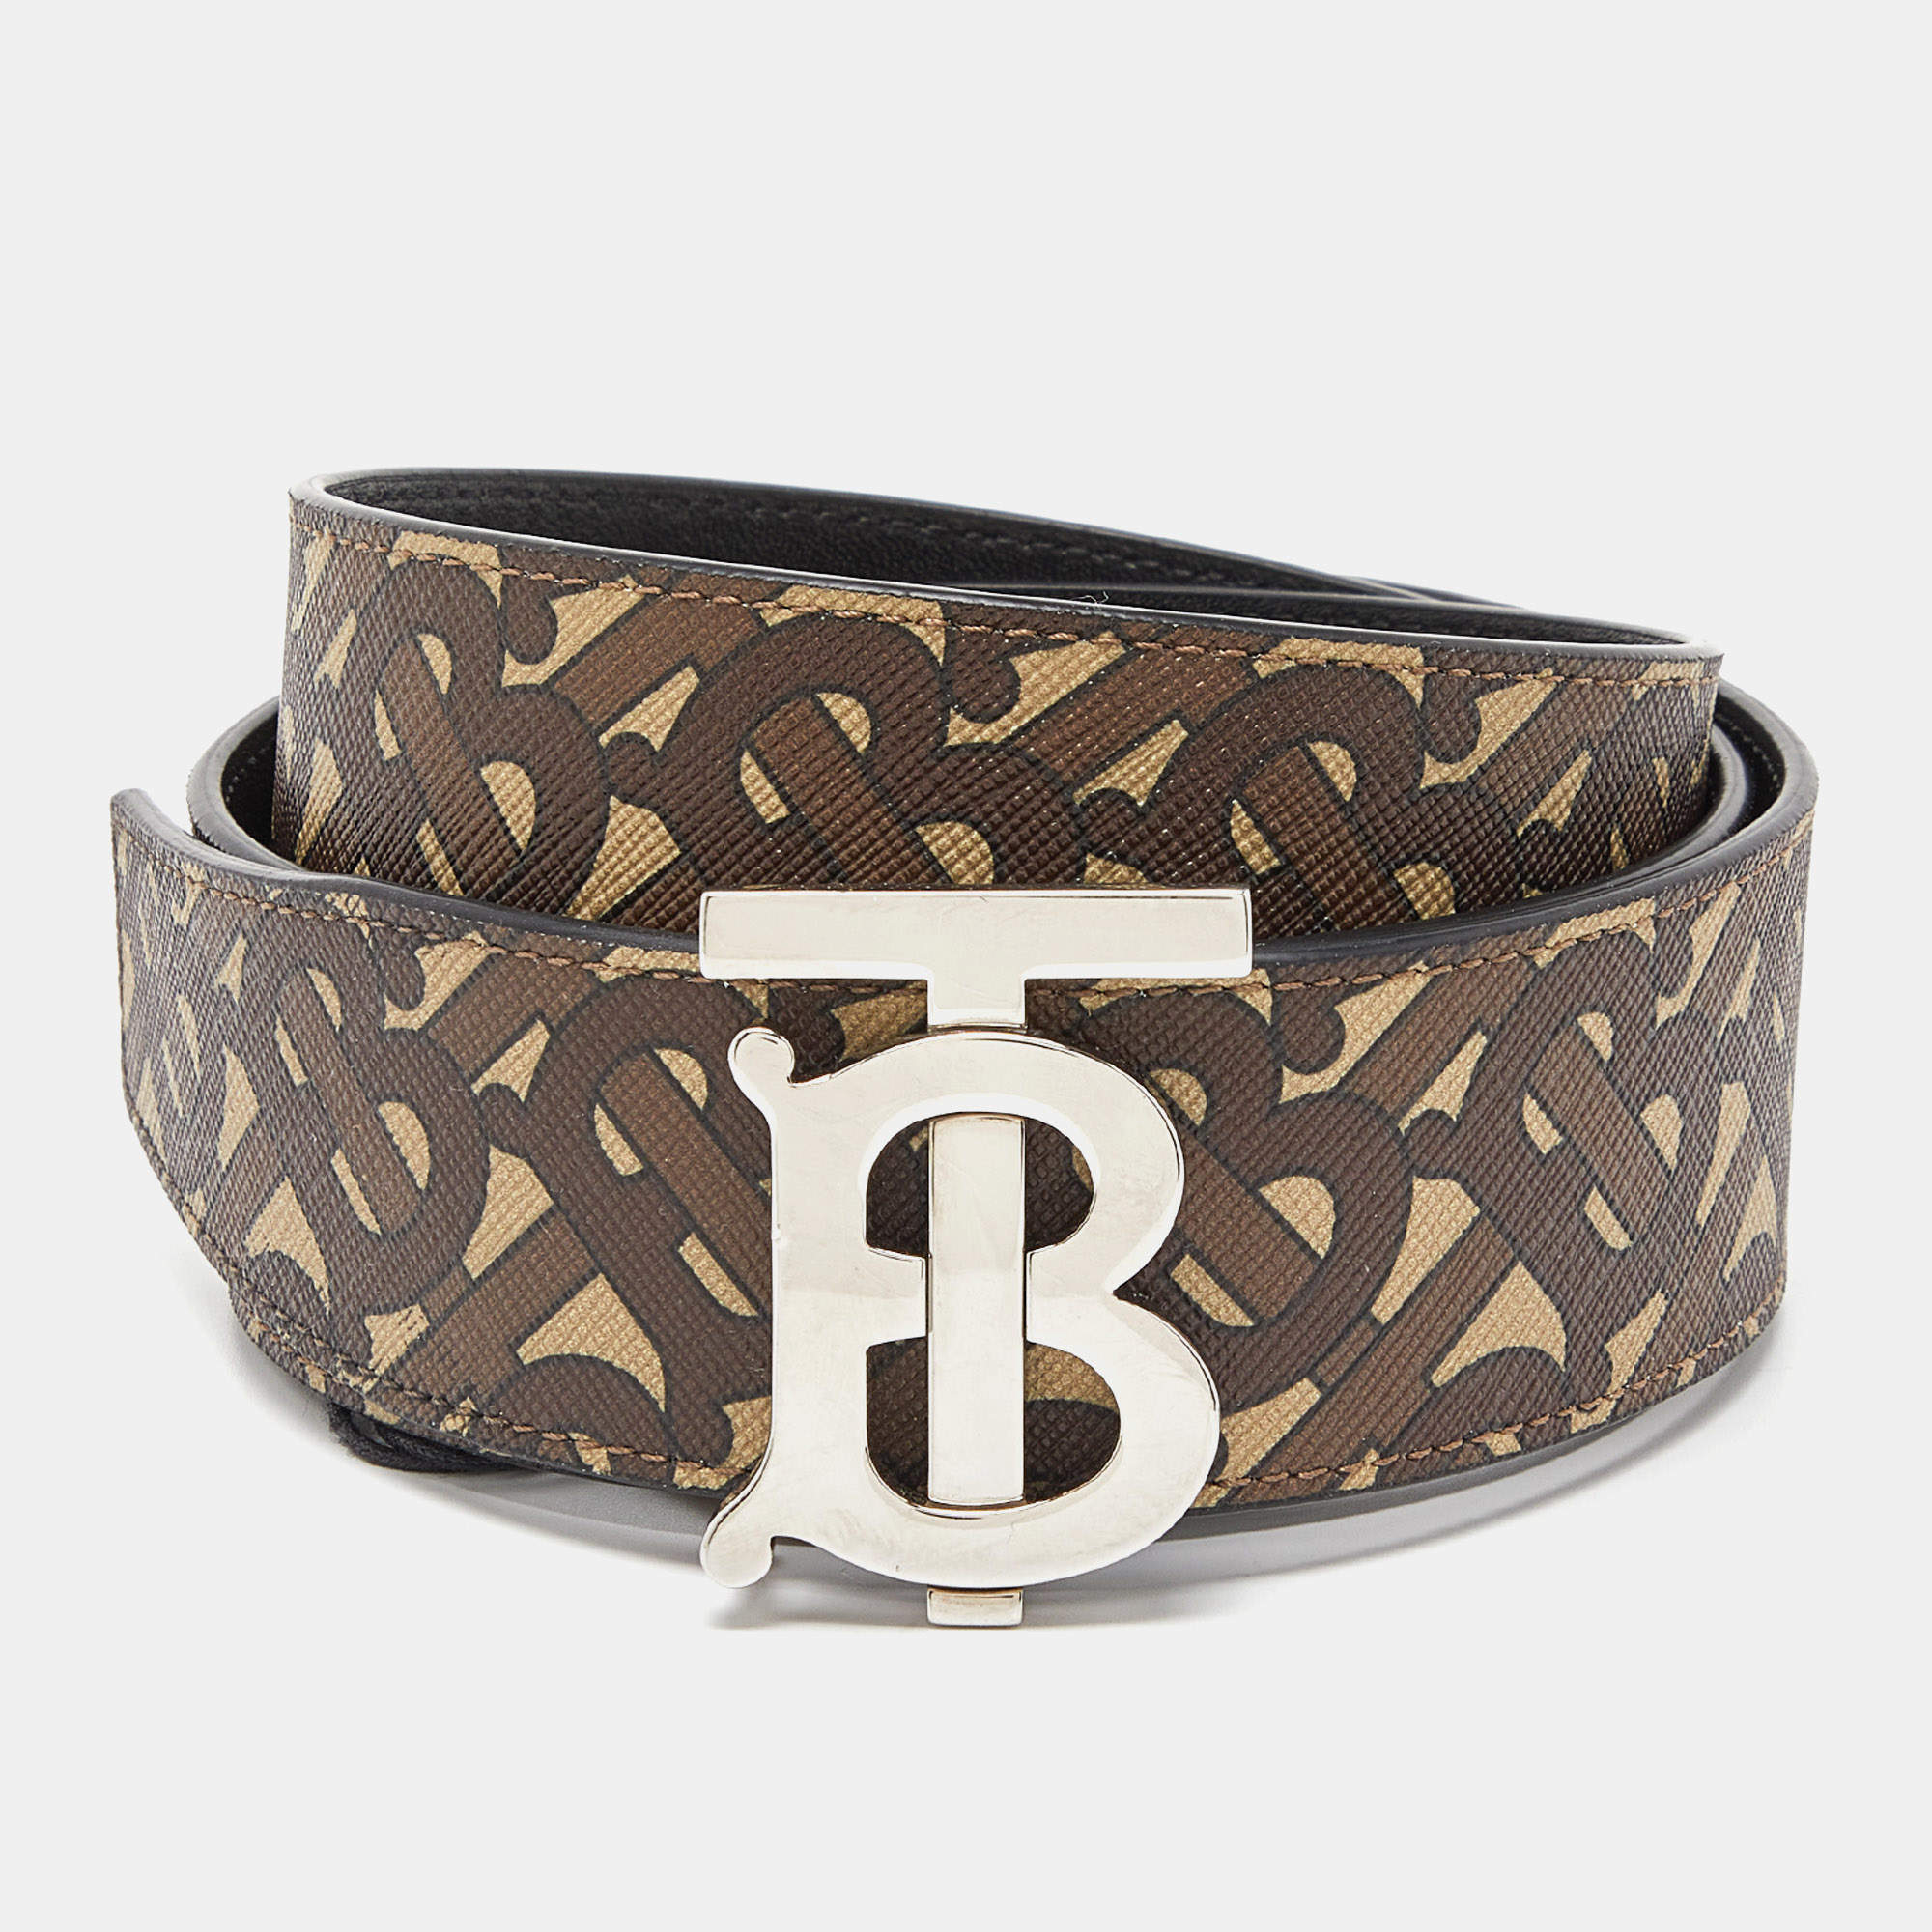 Burberry, Accessories, Authentic Burberry Belt